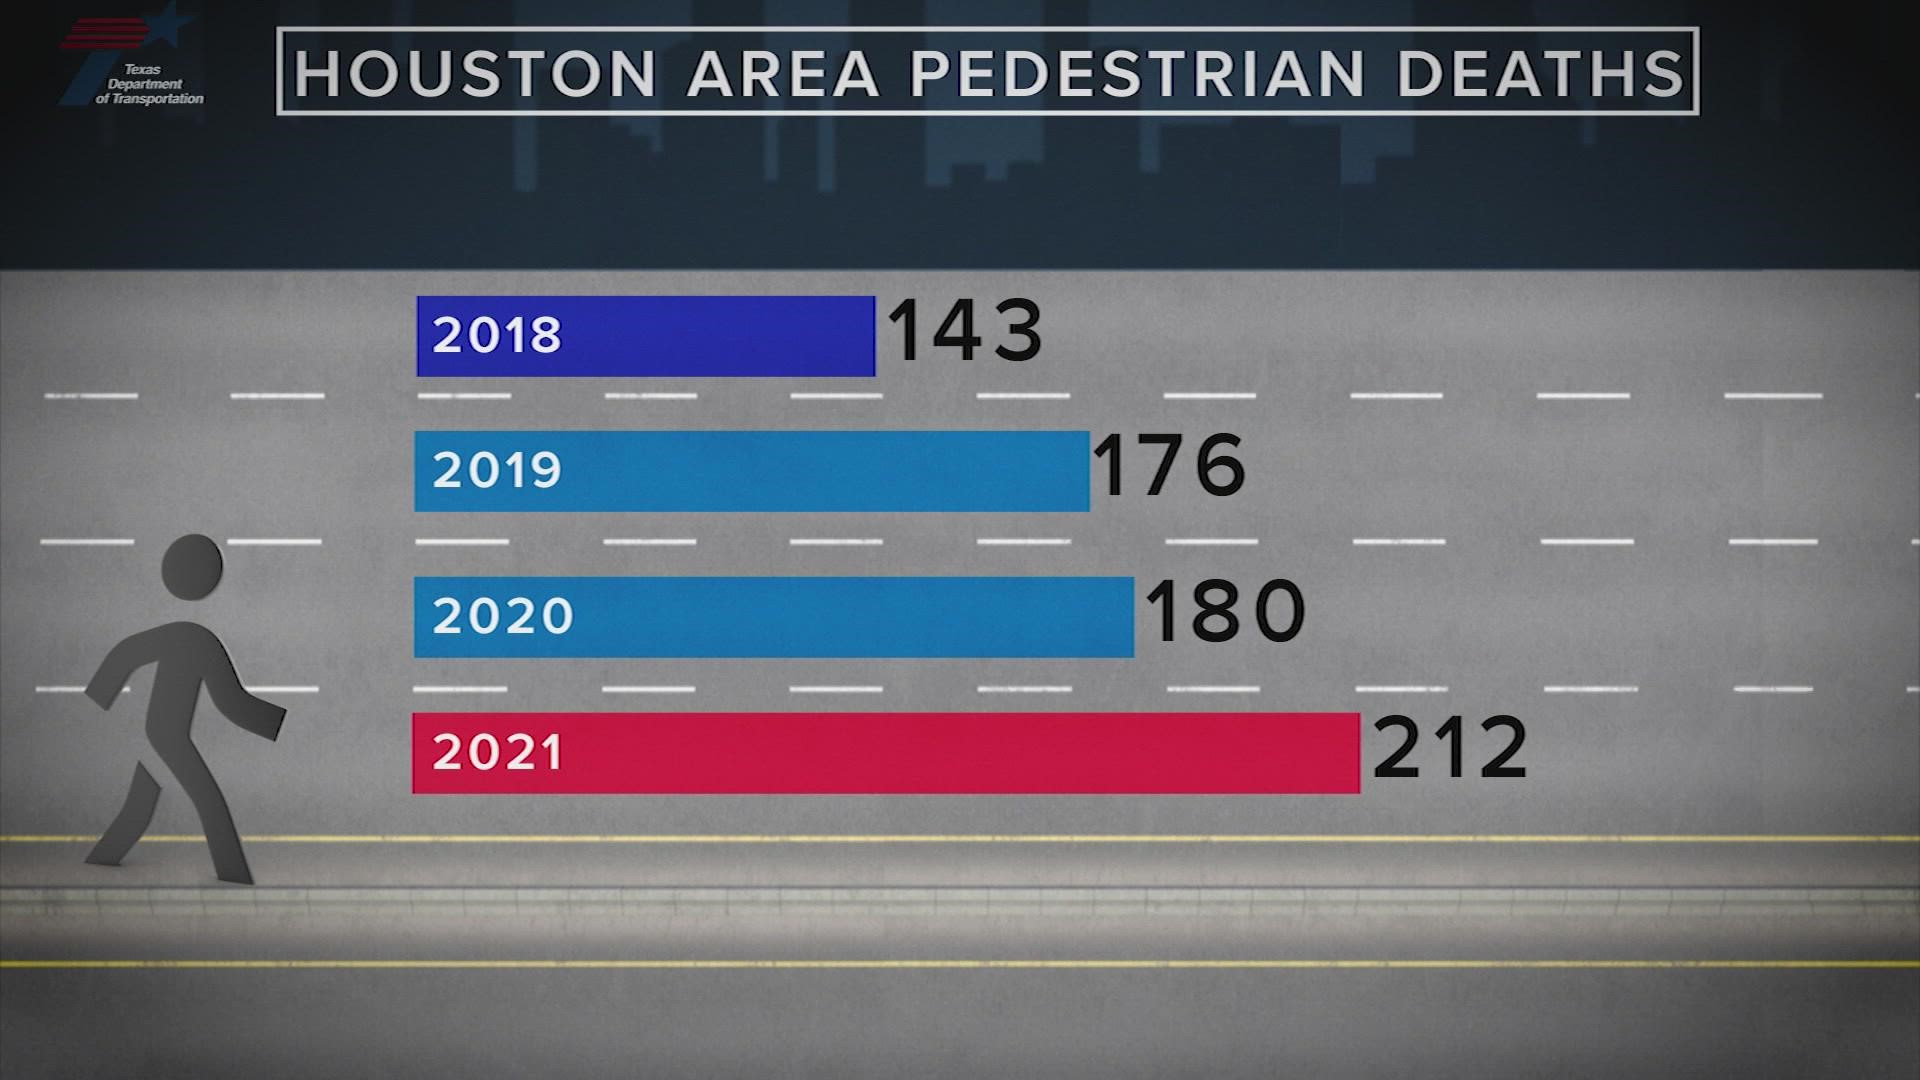 More than 700 pedestrians were killed from 2018 until March of this year.